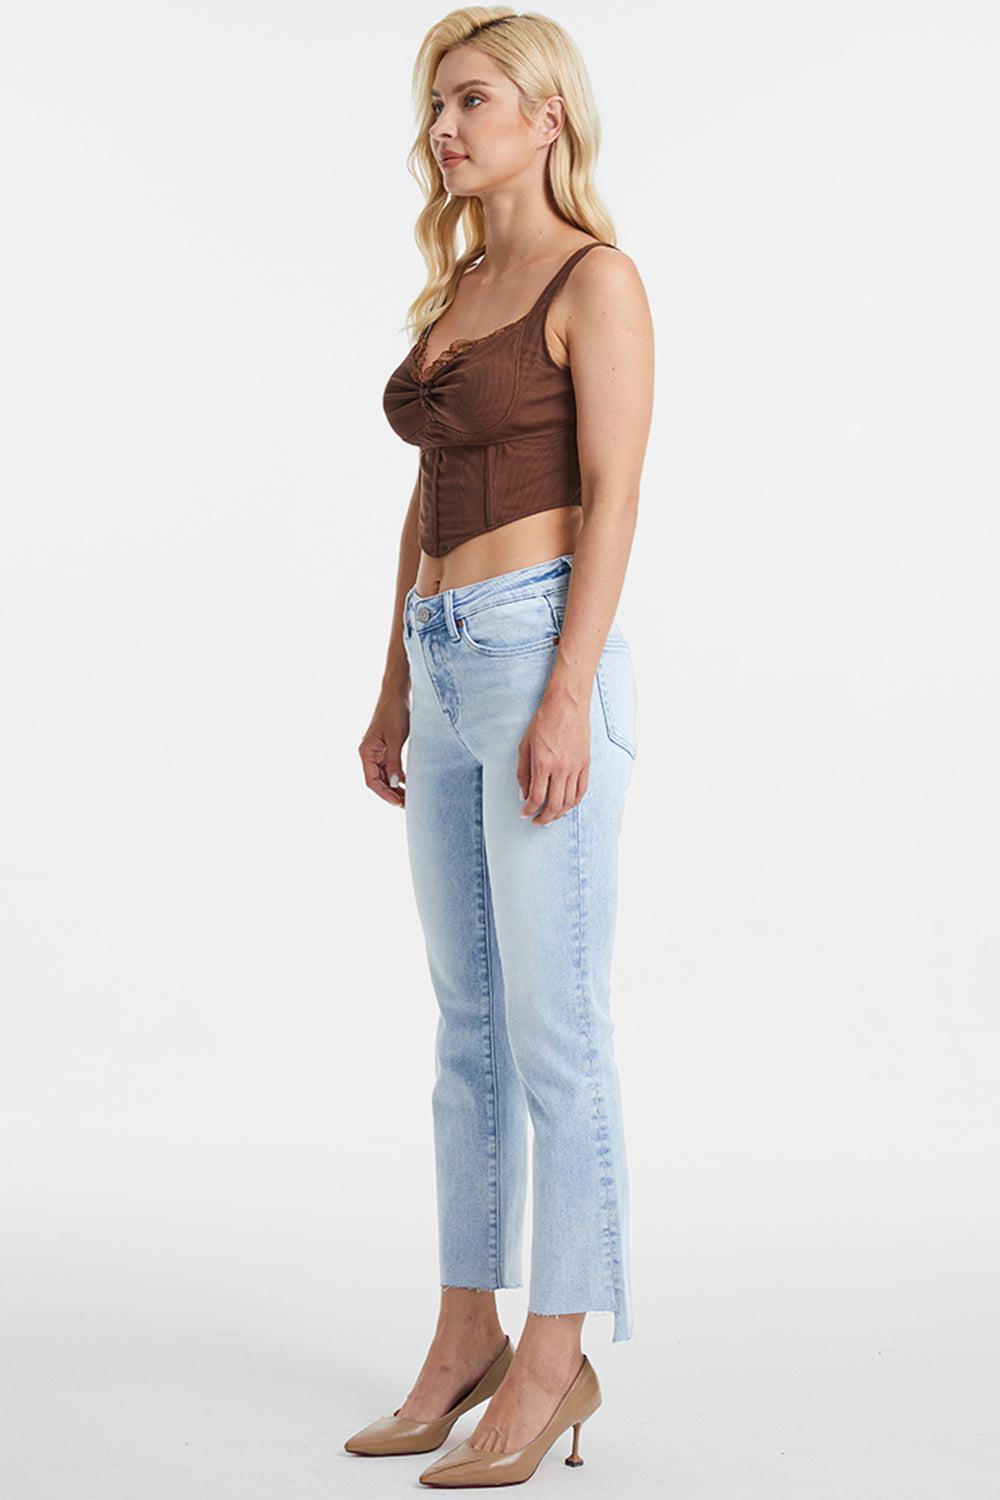 a woman in a brown top and jeans